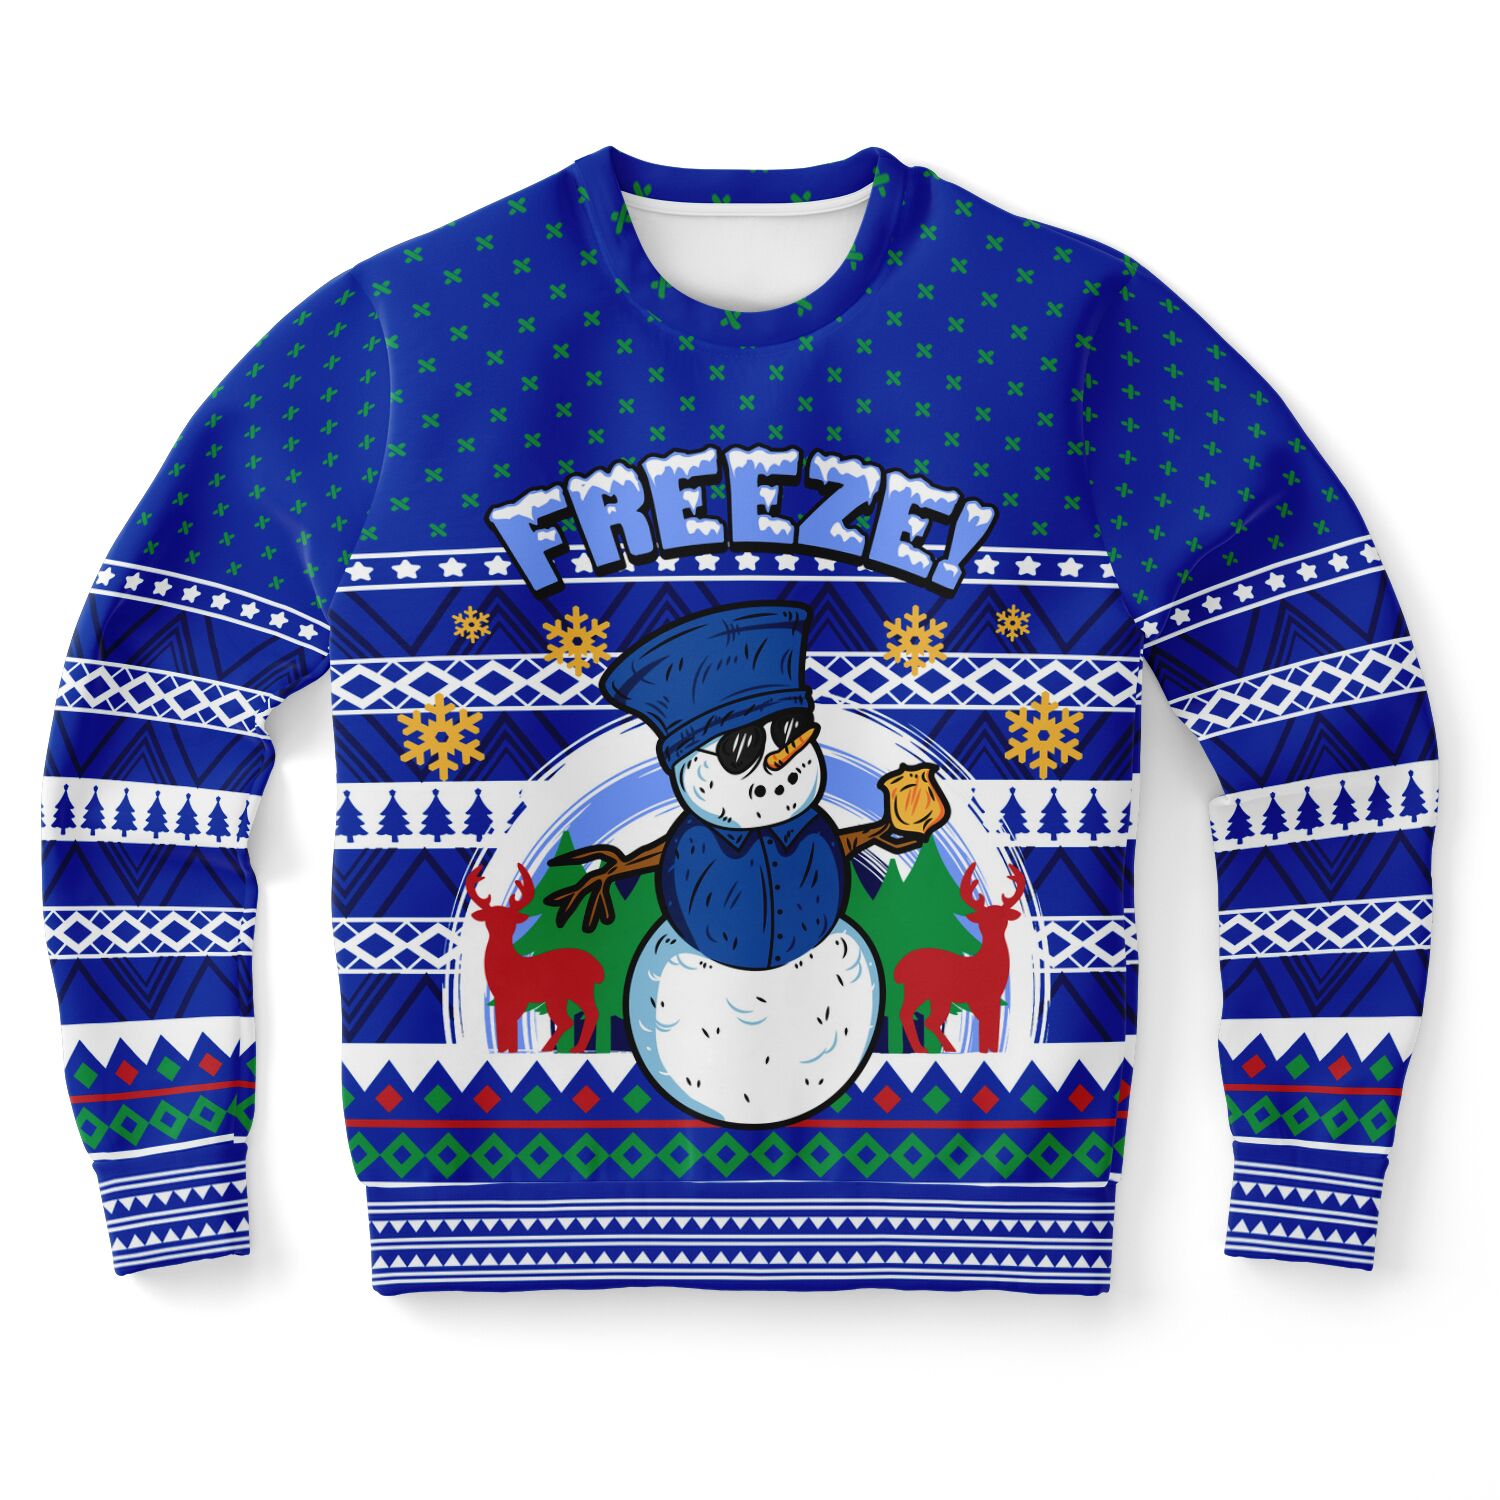 Snowman Freeze Police Officer | Unisex Ugly Christmas Sweater, Xmas Sweater, Holiday Sweater, Festive Sweater, Funny Sweater, Funny Party Shirt